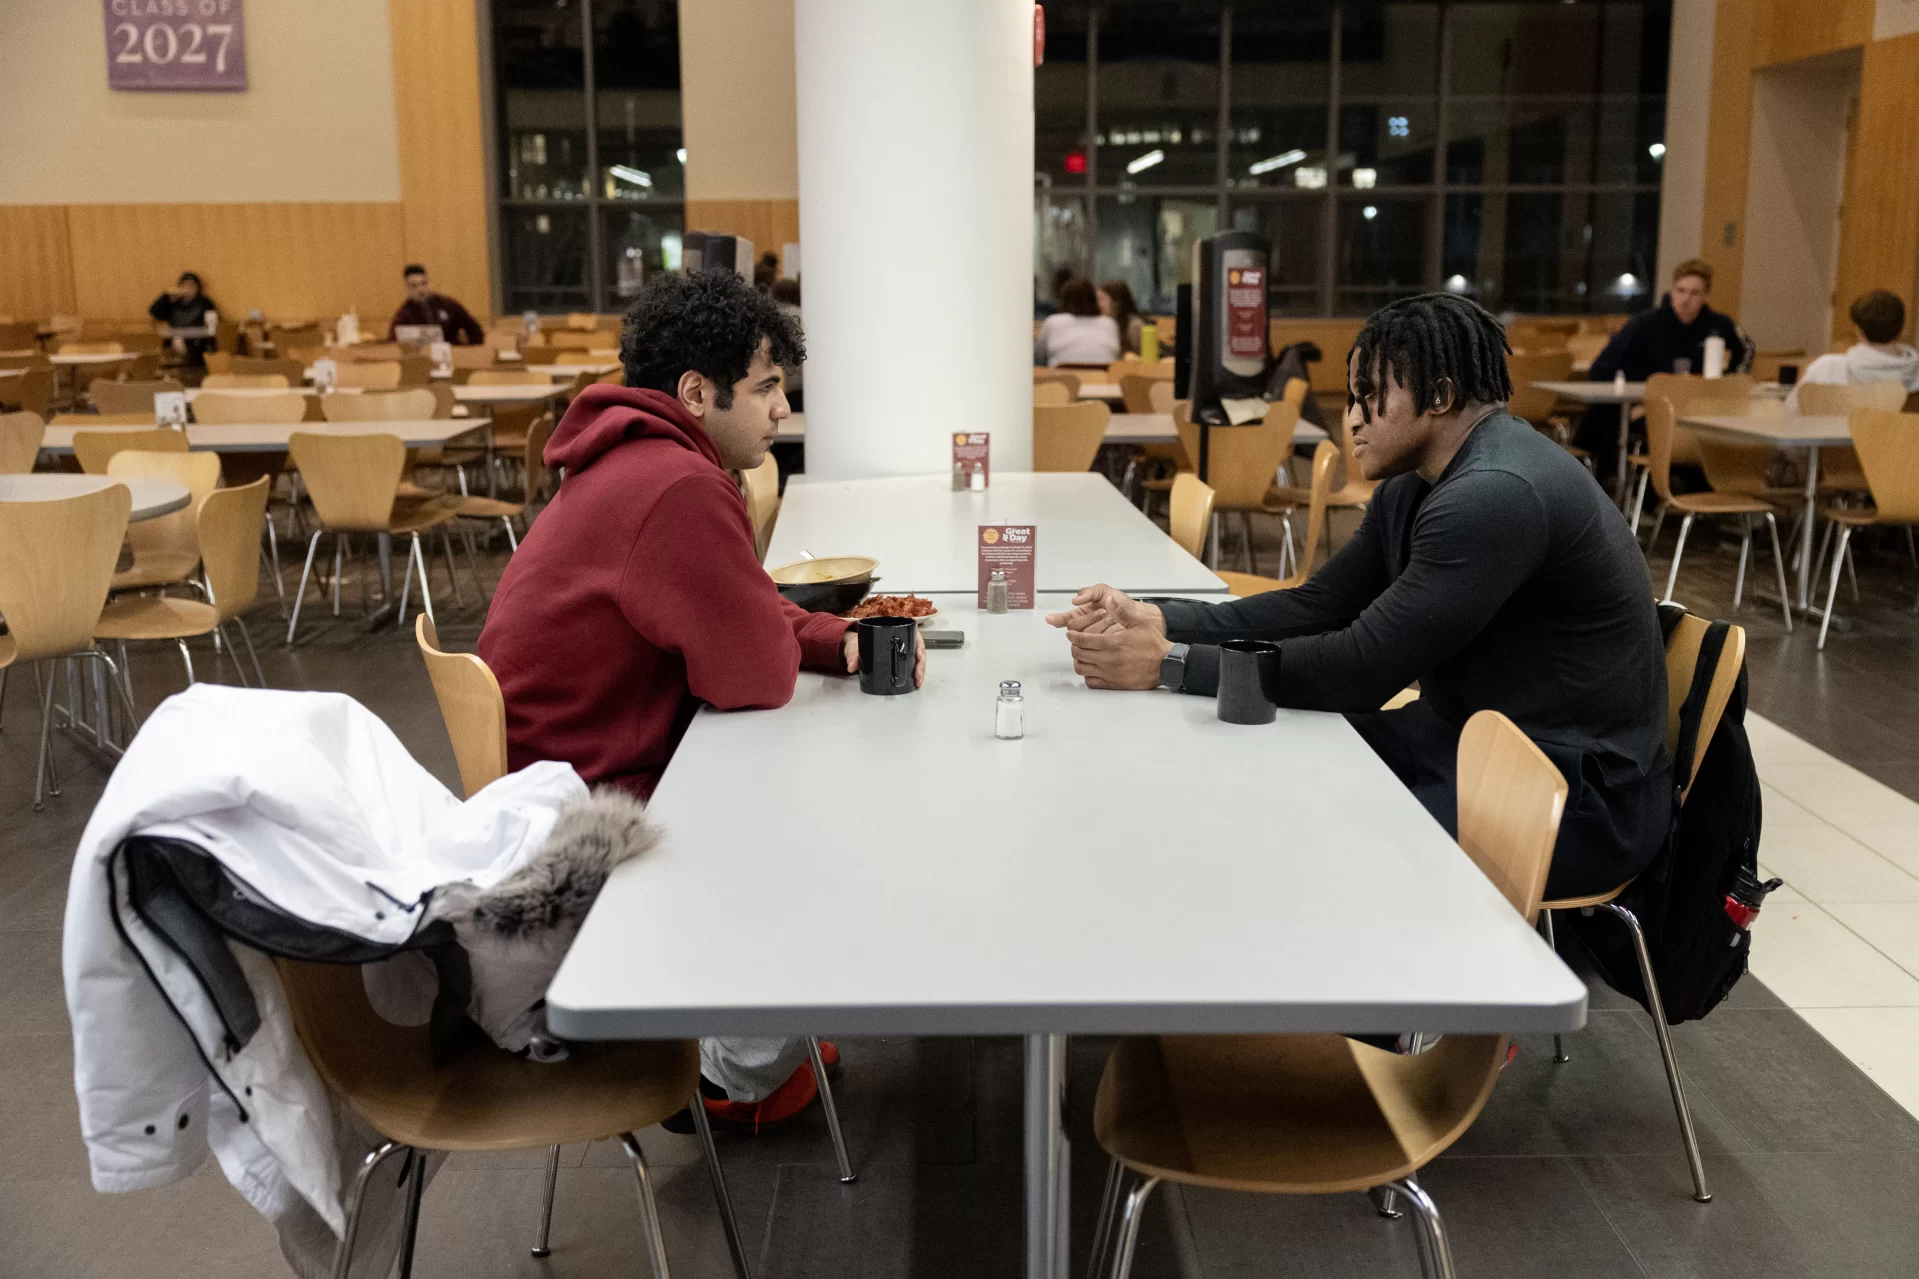 A day in the Life of Commons on March 12, 2024 from opening at 4 a.m. to closing at 9:45 p.m., featuring students, staff, and faculty — and a few guests.